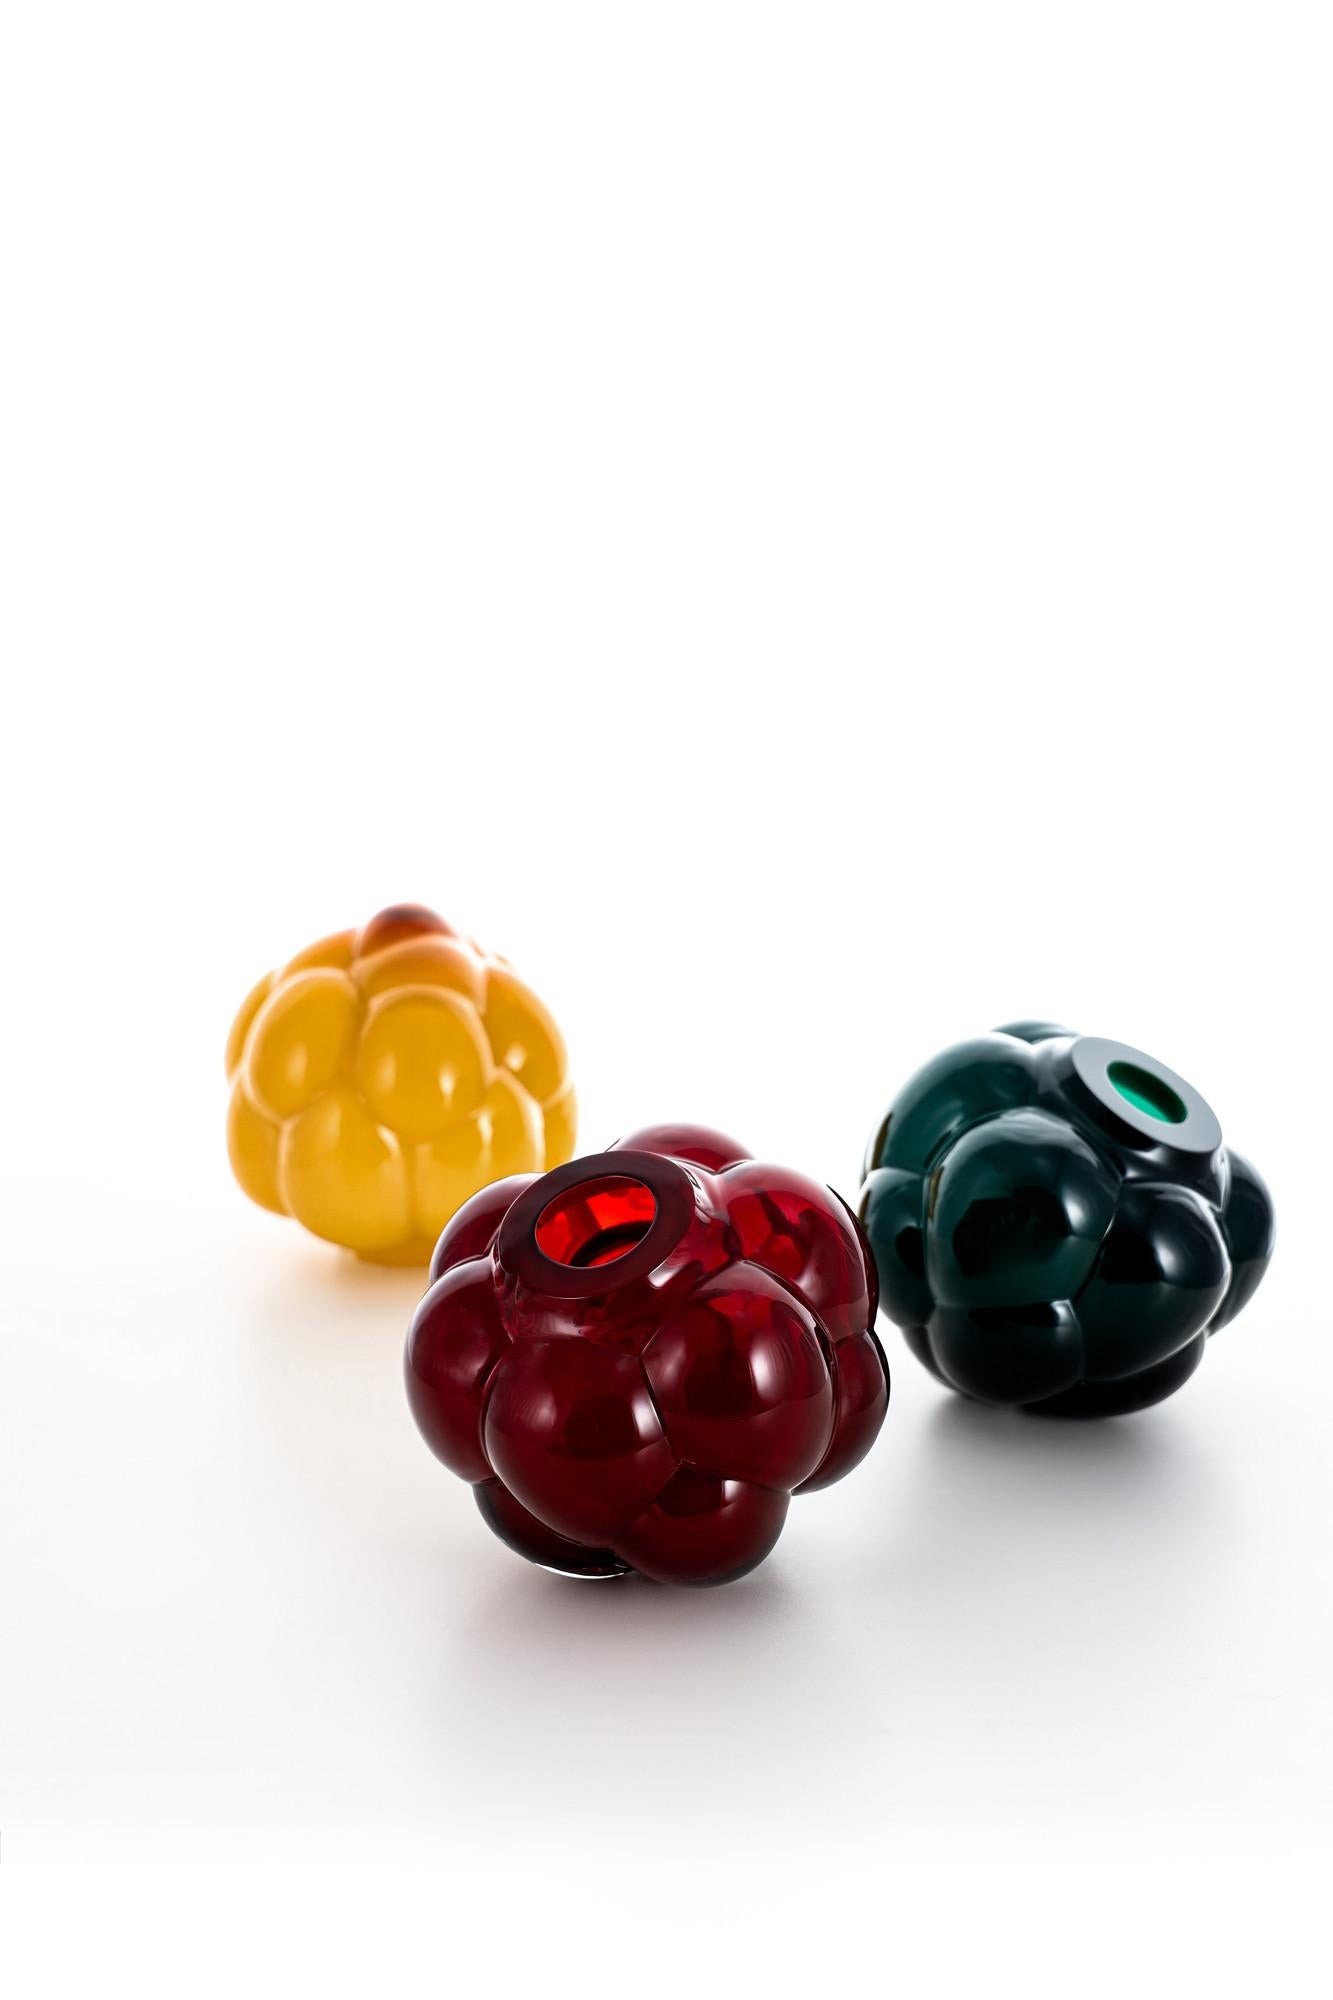 Ellen Ehk Åkesson is a Swedish glass artist who tells stories of the mysterious forest through her art glass, such as Berry Tales – a bubbling, bulbous berry plucked directly from the woodlands in her mind. The object in amber is handmade, with a